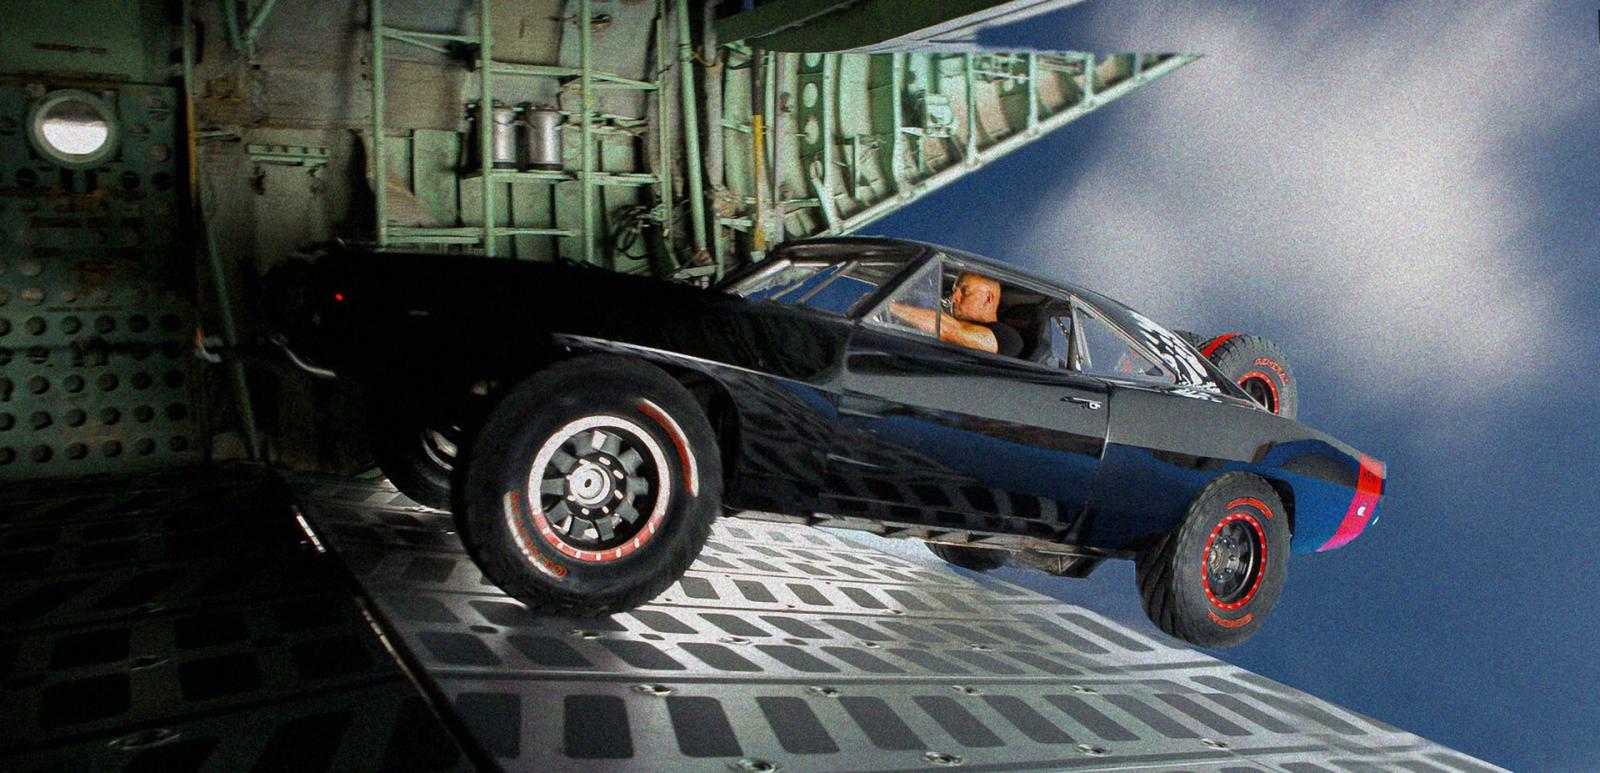 10 Times Fast & Furious Defied Physics, Logic, and Common Sense - image 3